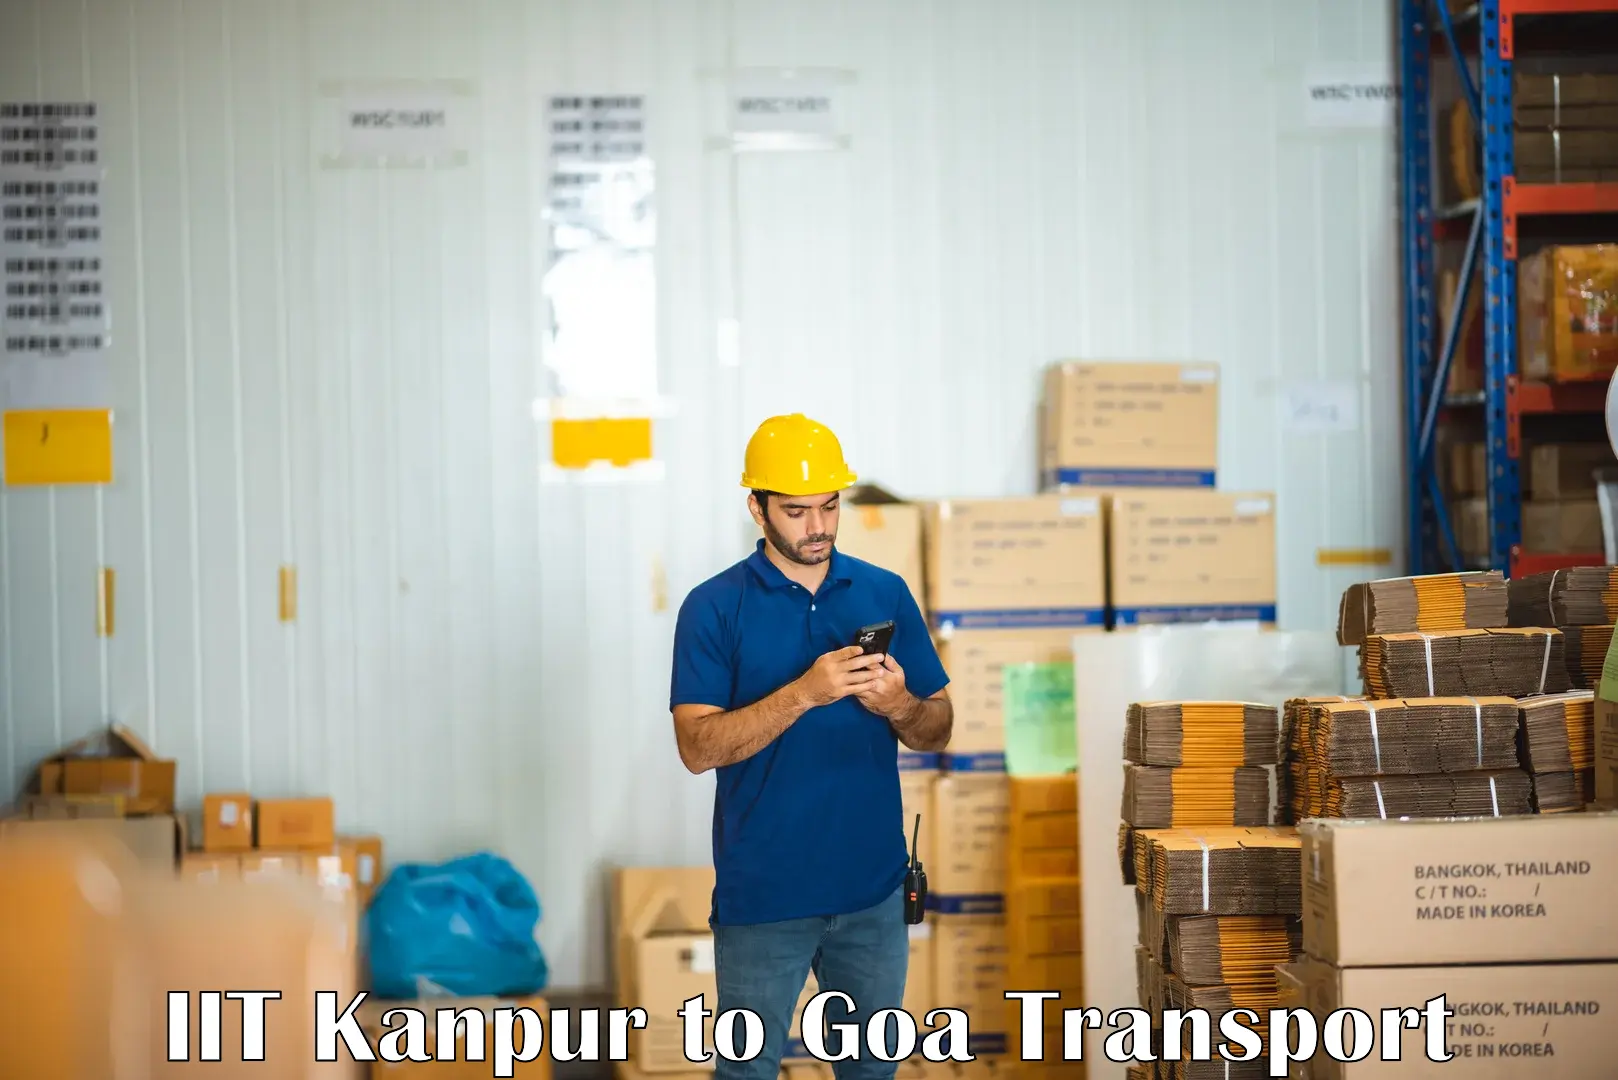 Container transport service IIT Kanpur to Goa University